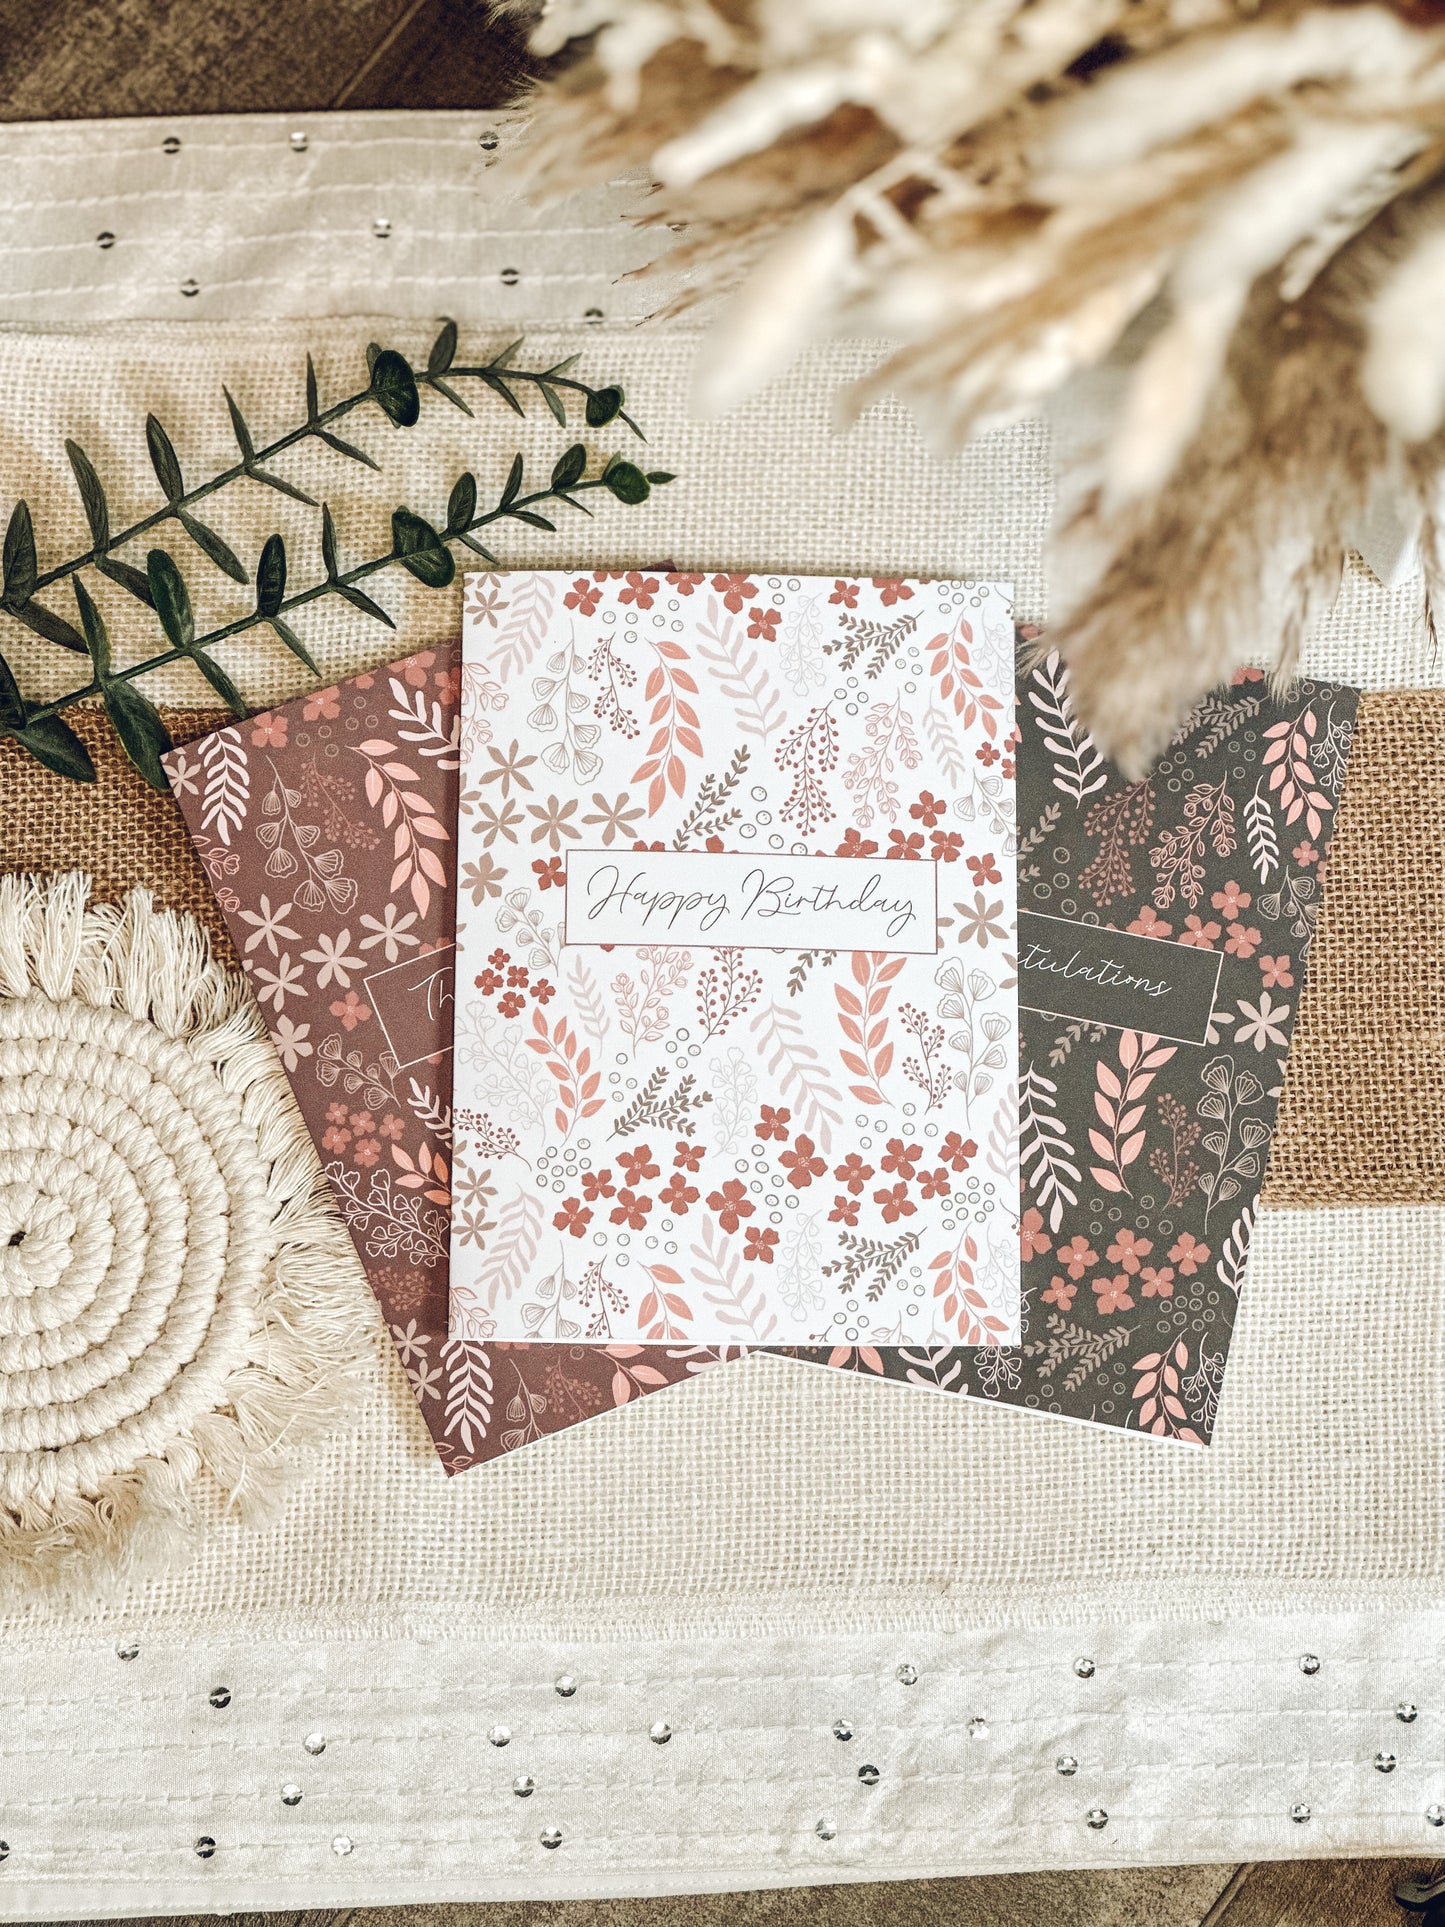 Floral pattern greeting cards